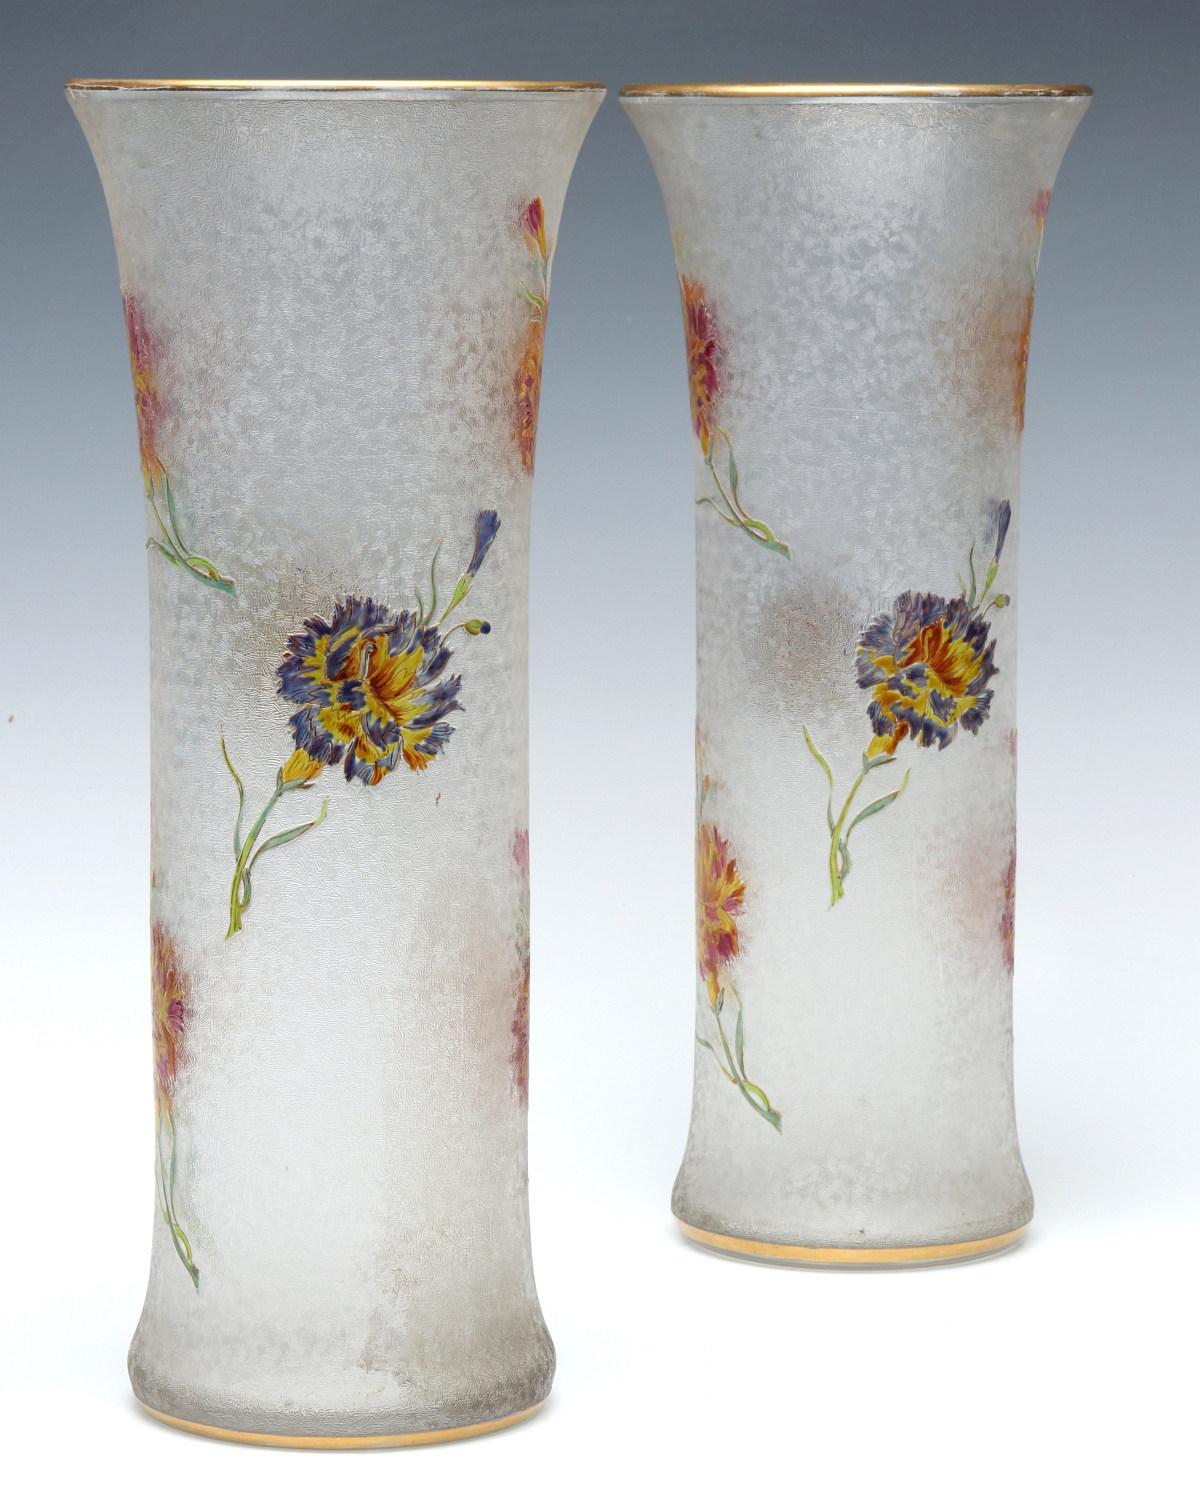 A PAIR OF 13.5 INCH MONT JOYE ETCHED AND ENAMELED VASES